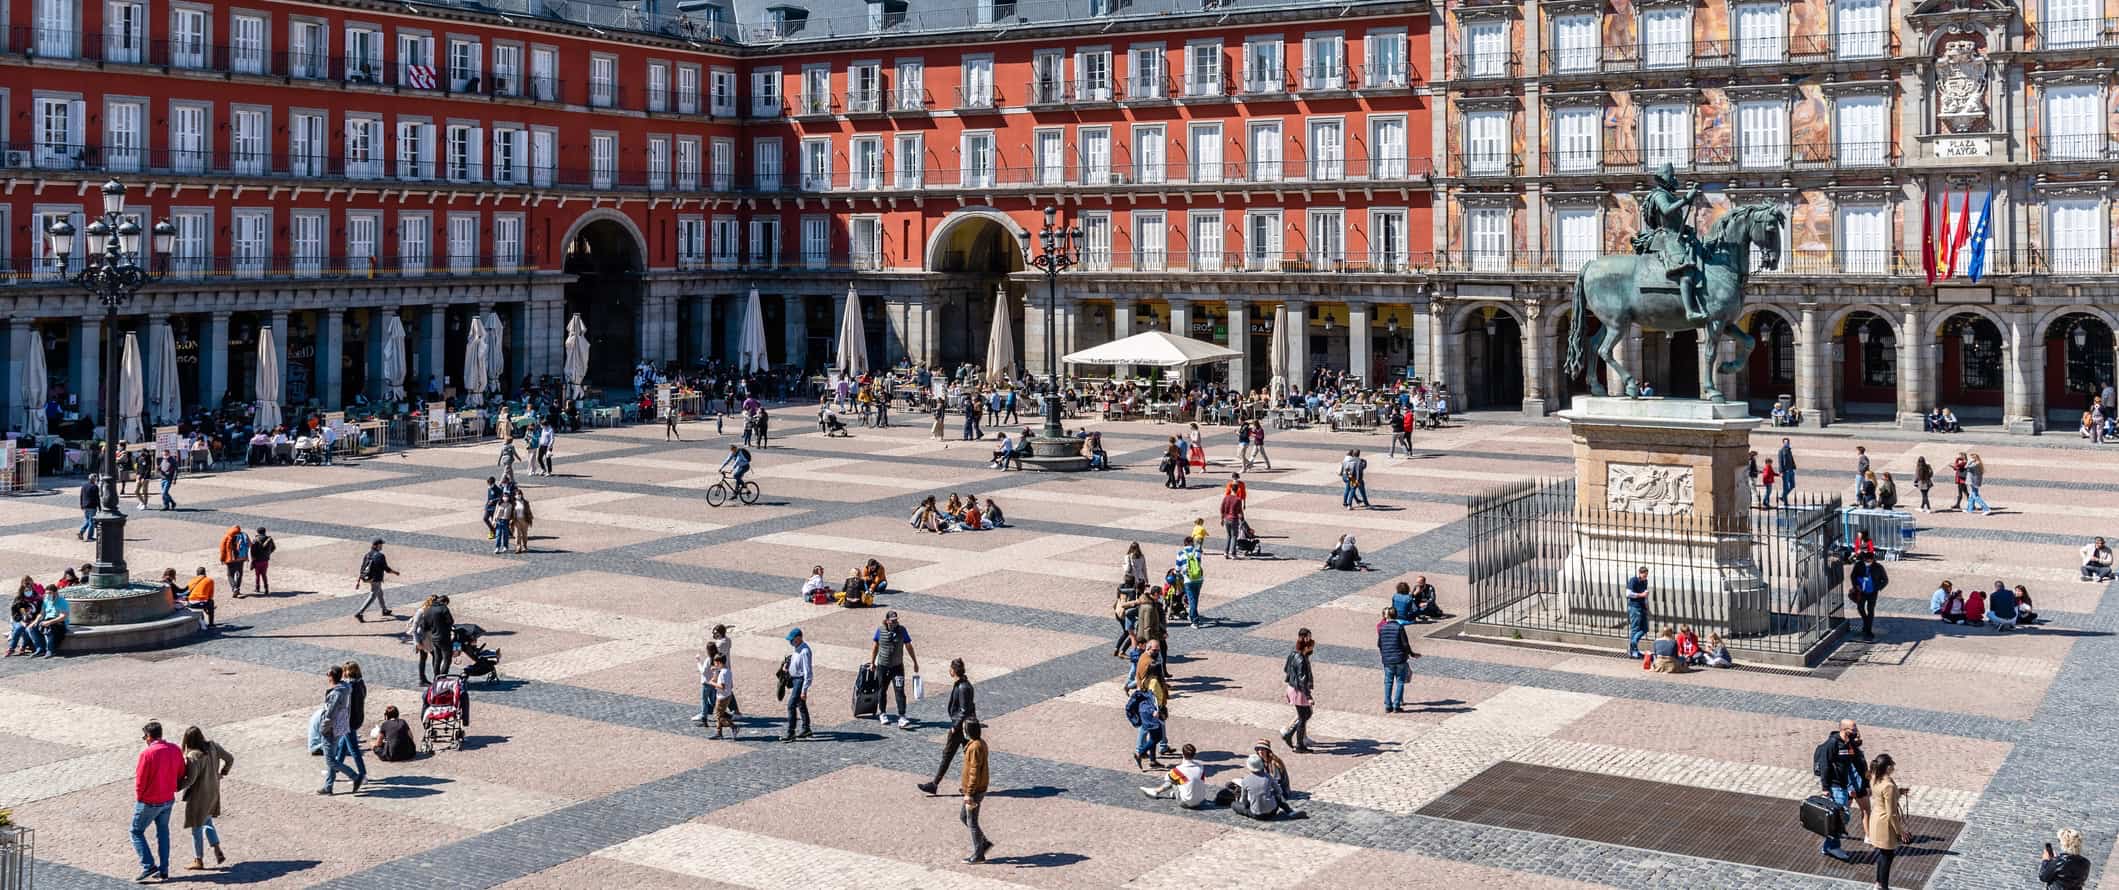 People relaxing and strolling around a huge plaza in MAdrid, Spain